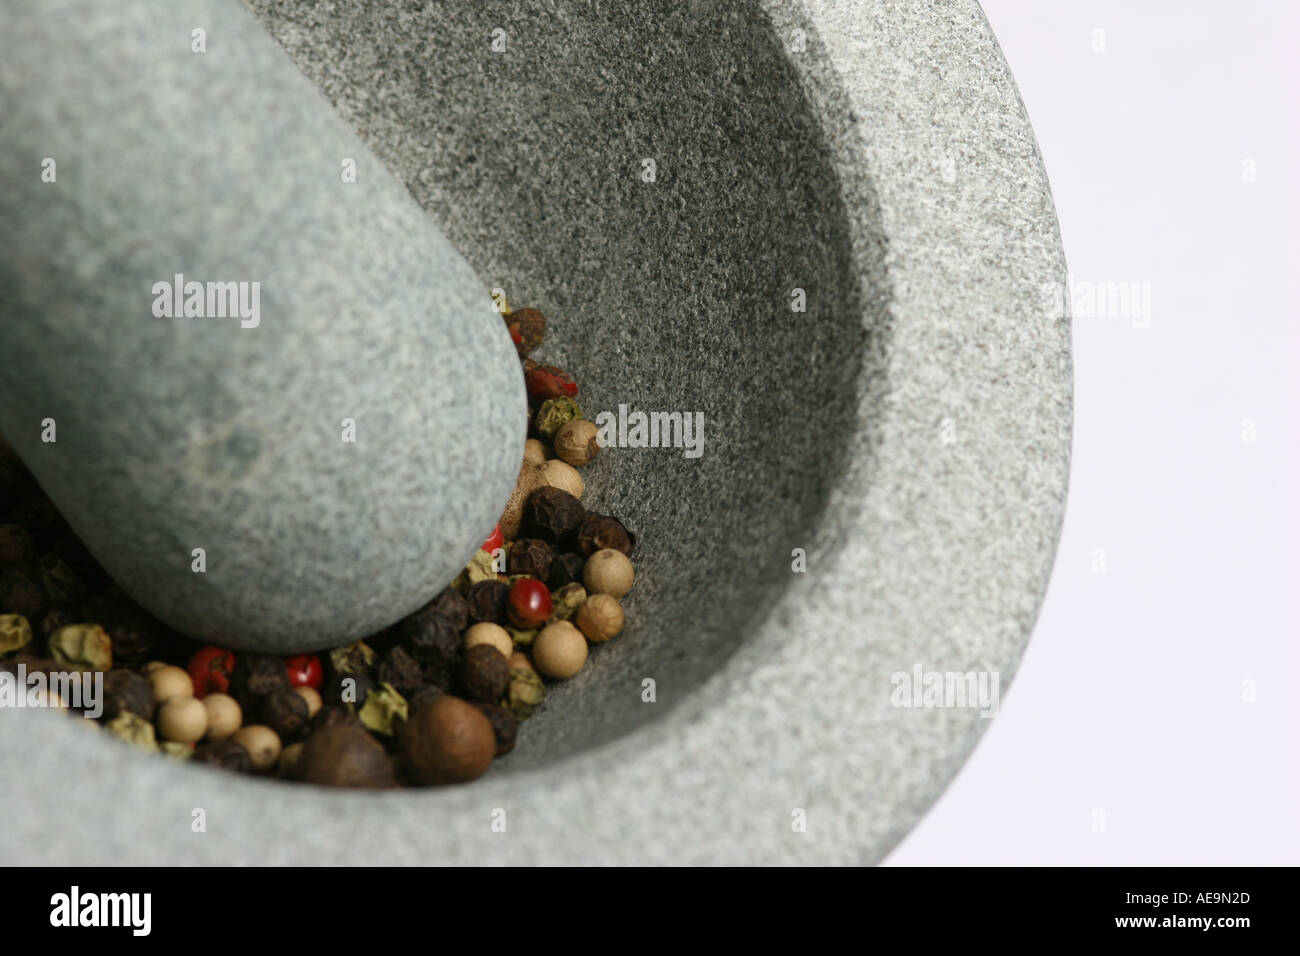 0219 Mixed Pepper Corn in a Pestle and mortar 10 Stock Photo